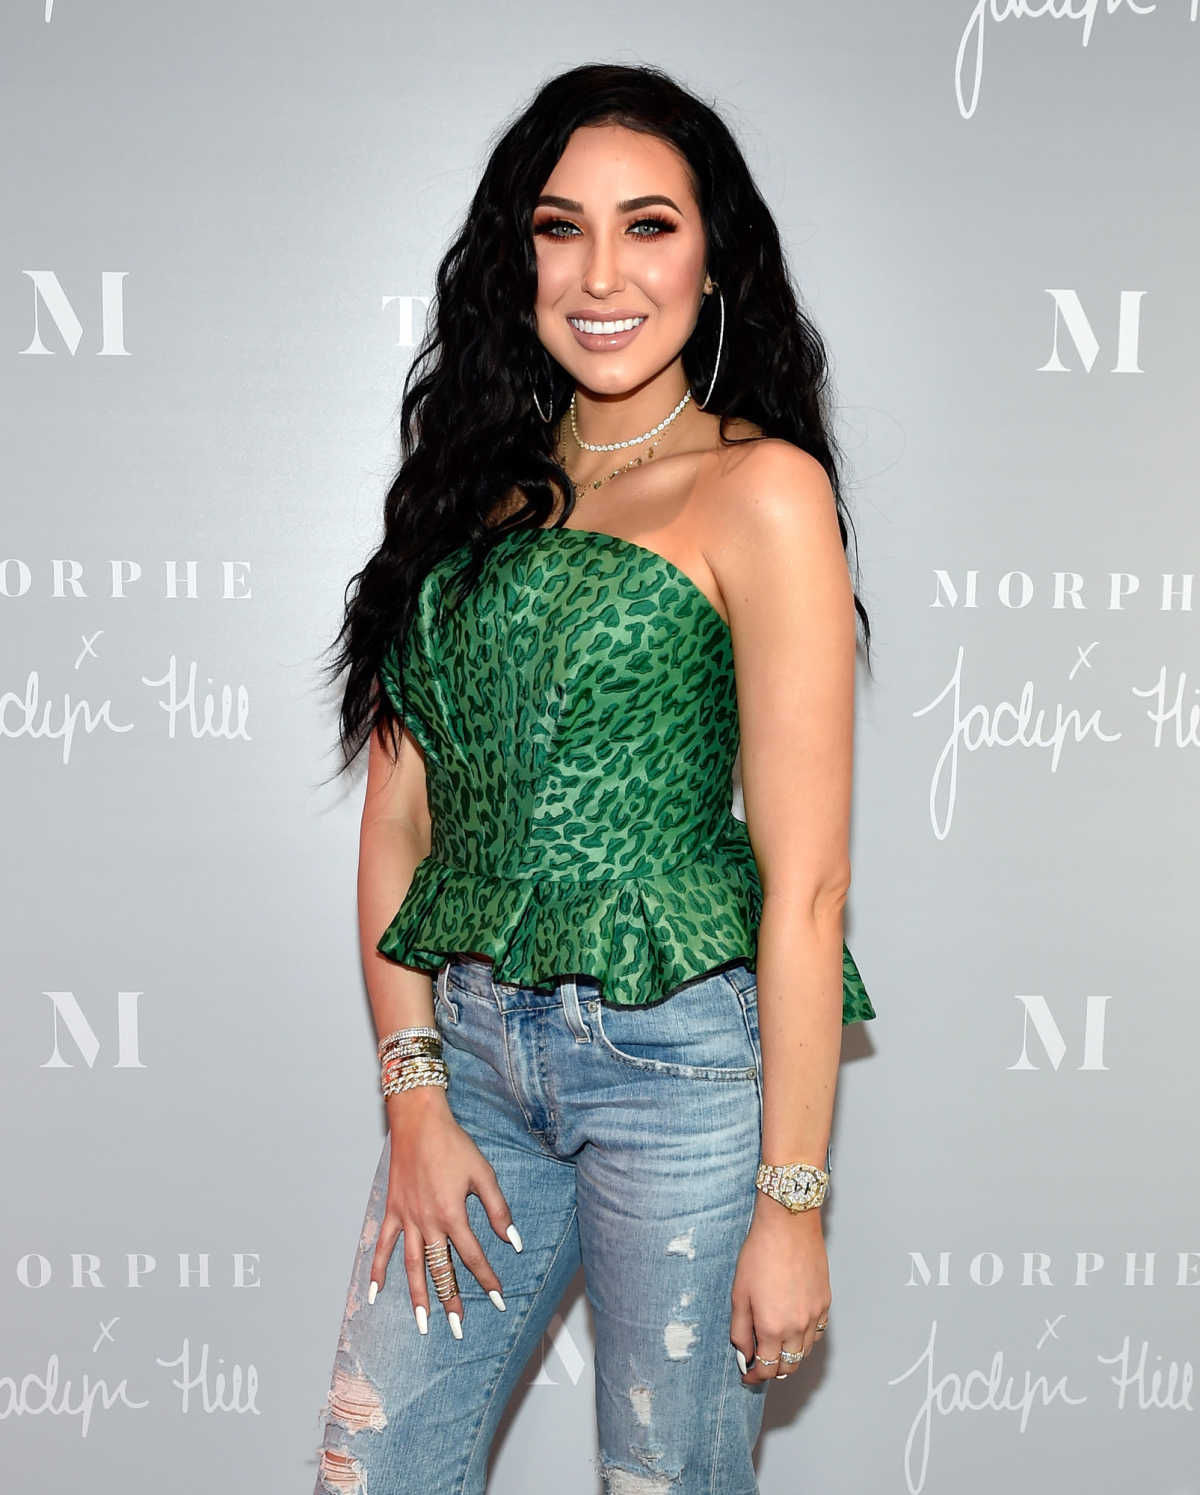 Jaclyn Hill Is Finally Speaking Out About Morphe Palette